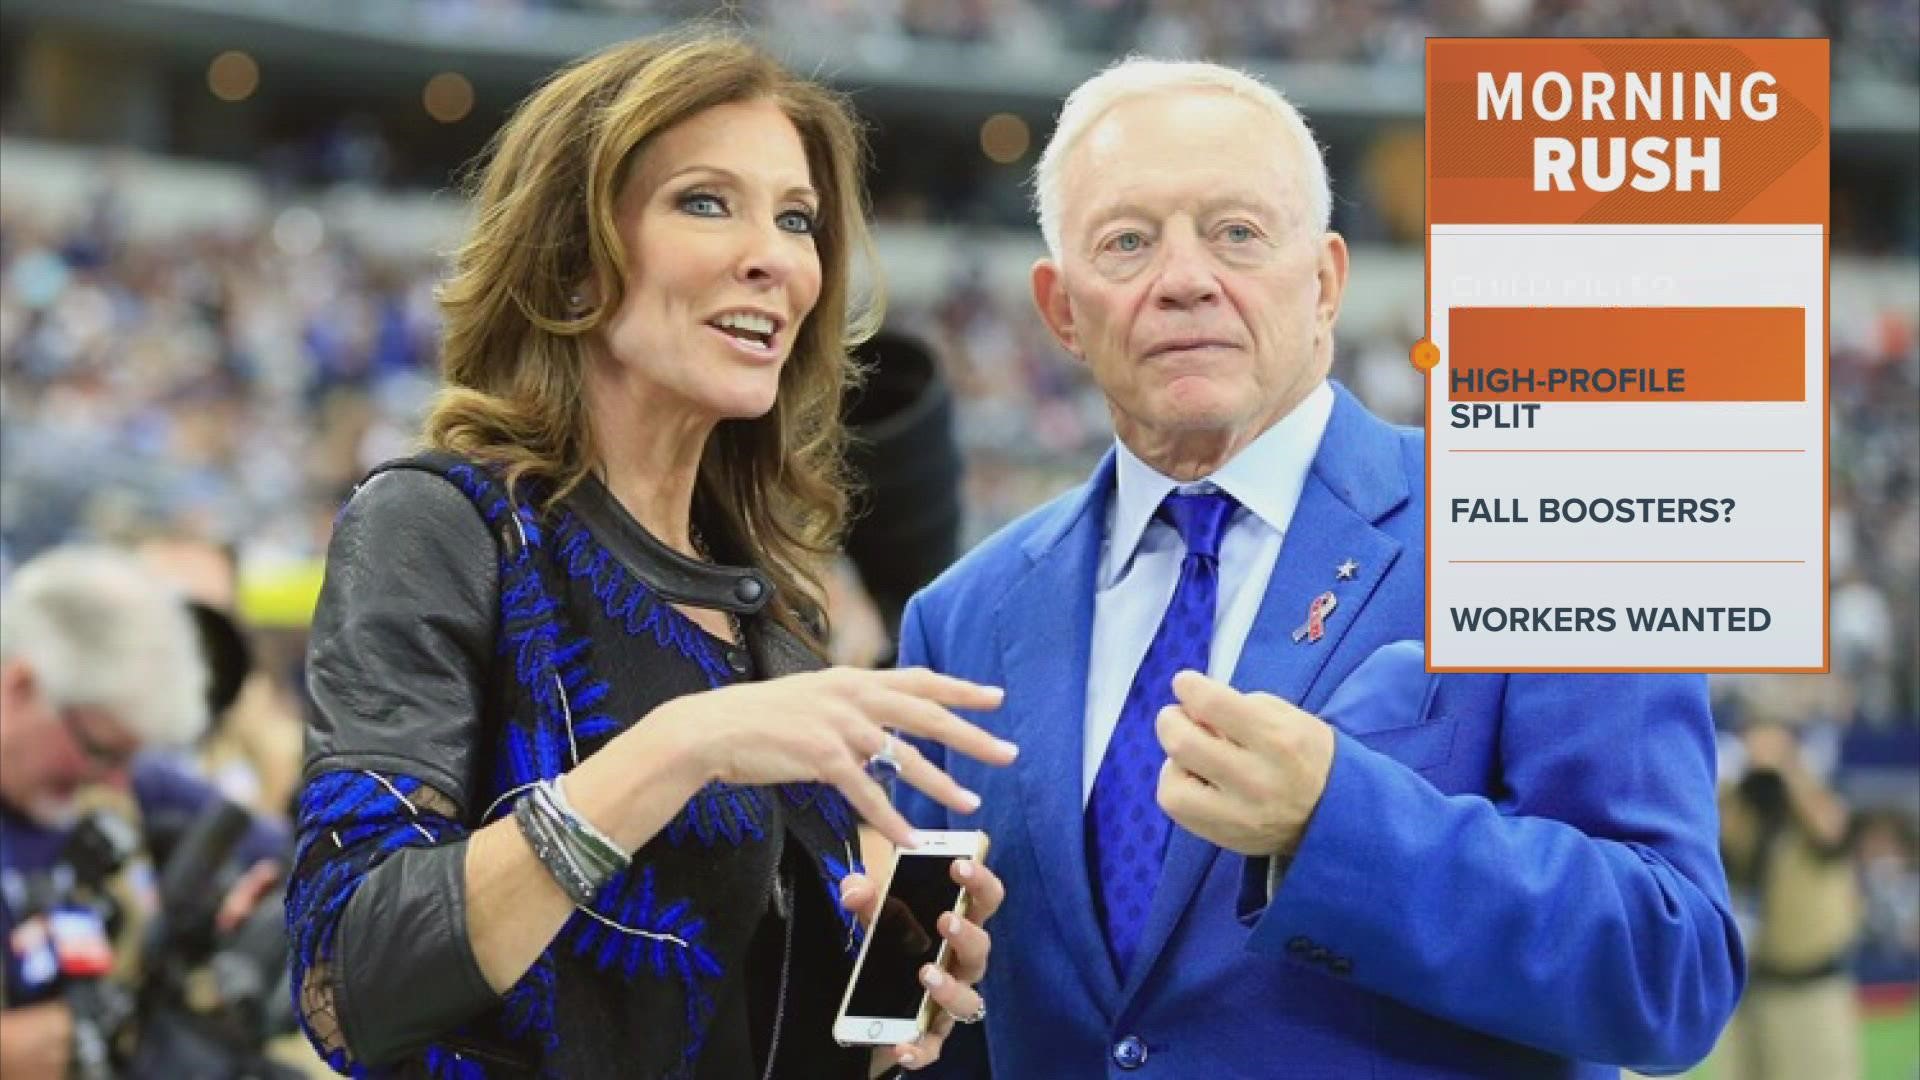 Charlotte Jones-Anderson, daughter of Dallas Cowboys owner Jerry Jones, filed for divorce from David 'Shy' Anderson in June 2019. They married in 1991.